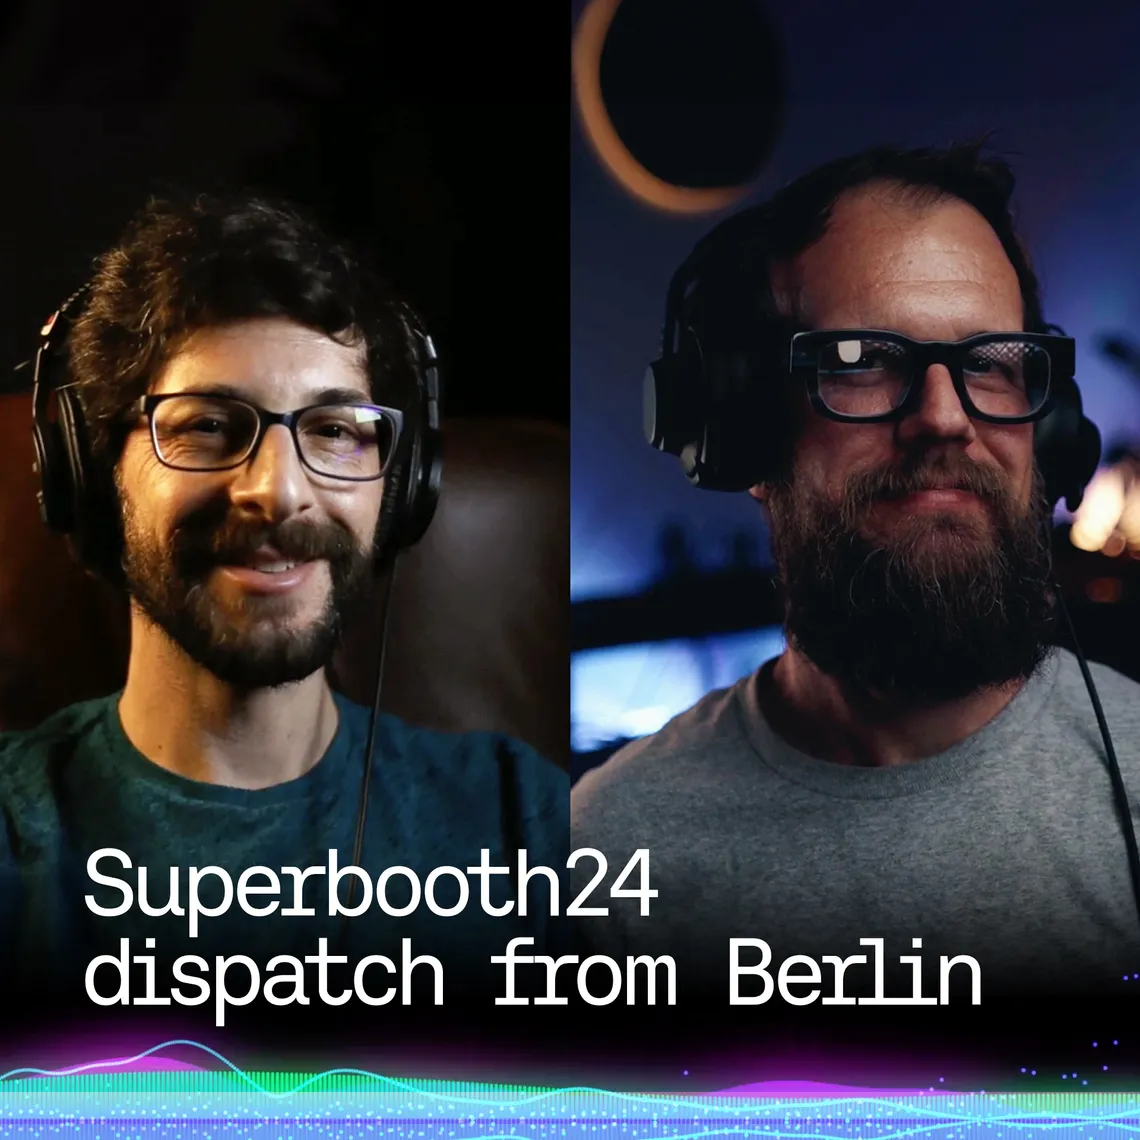 Superbooth24 dispatch from Berlin, we spoke with some of our favorite exhibitors